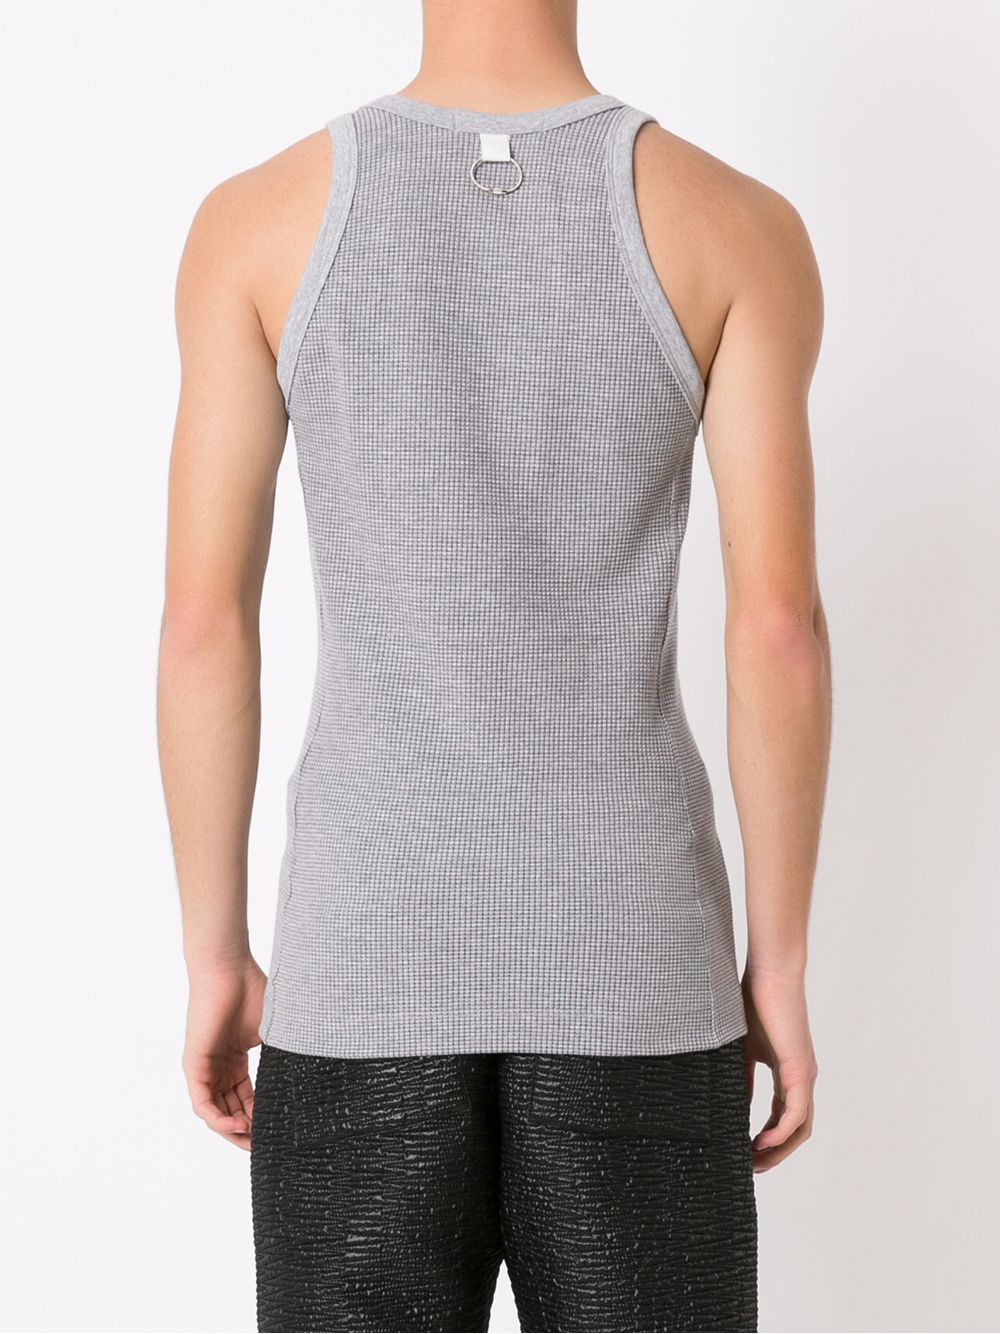 TANK TOP WAFFLE KNIT OFF-WHITE – PACE ™